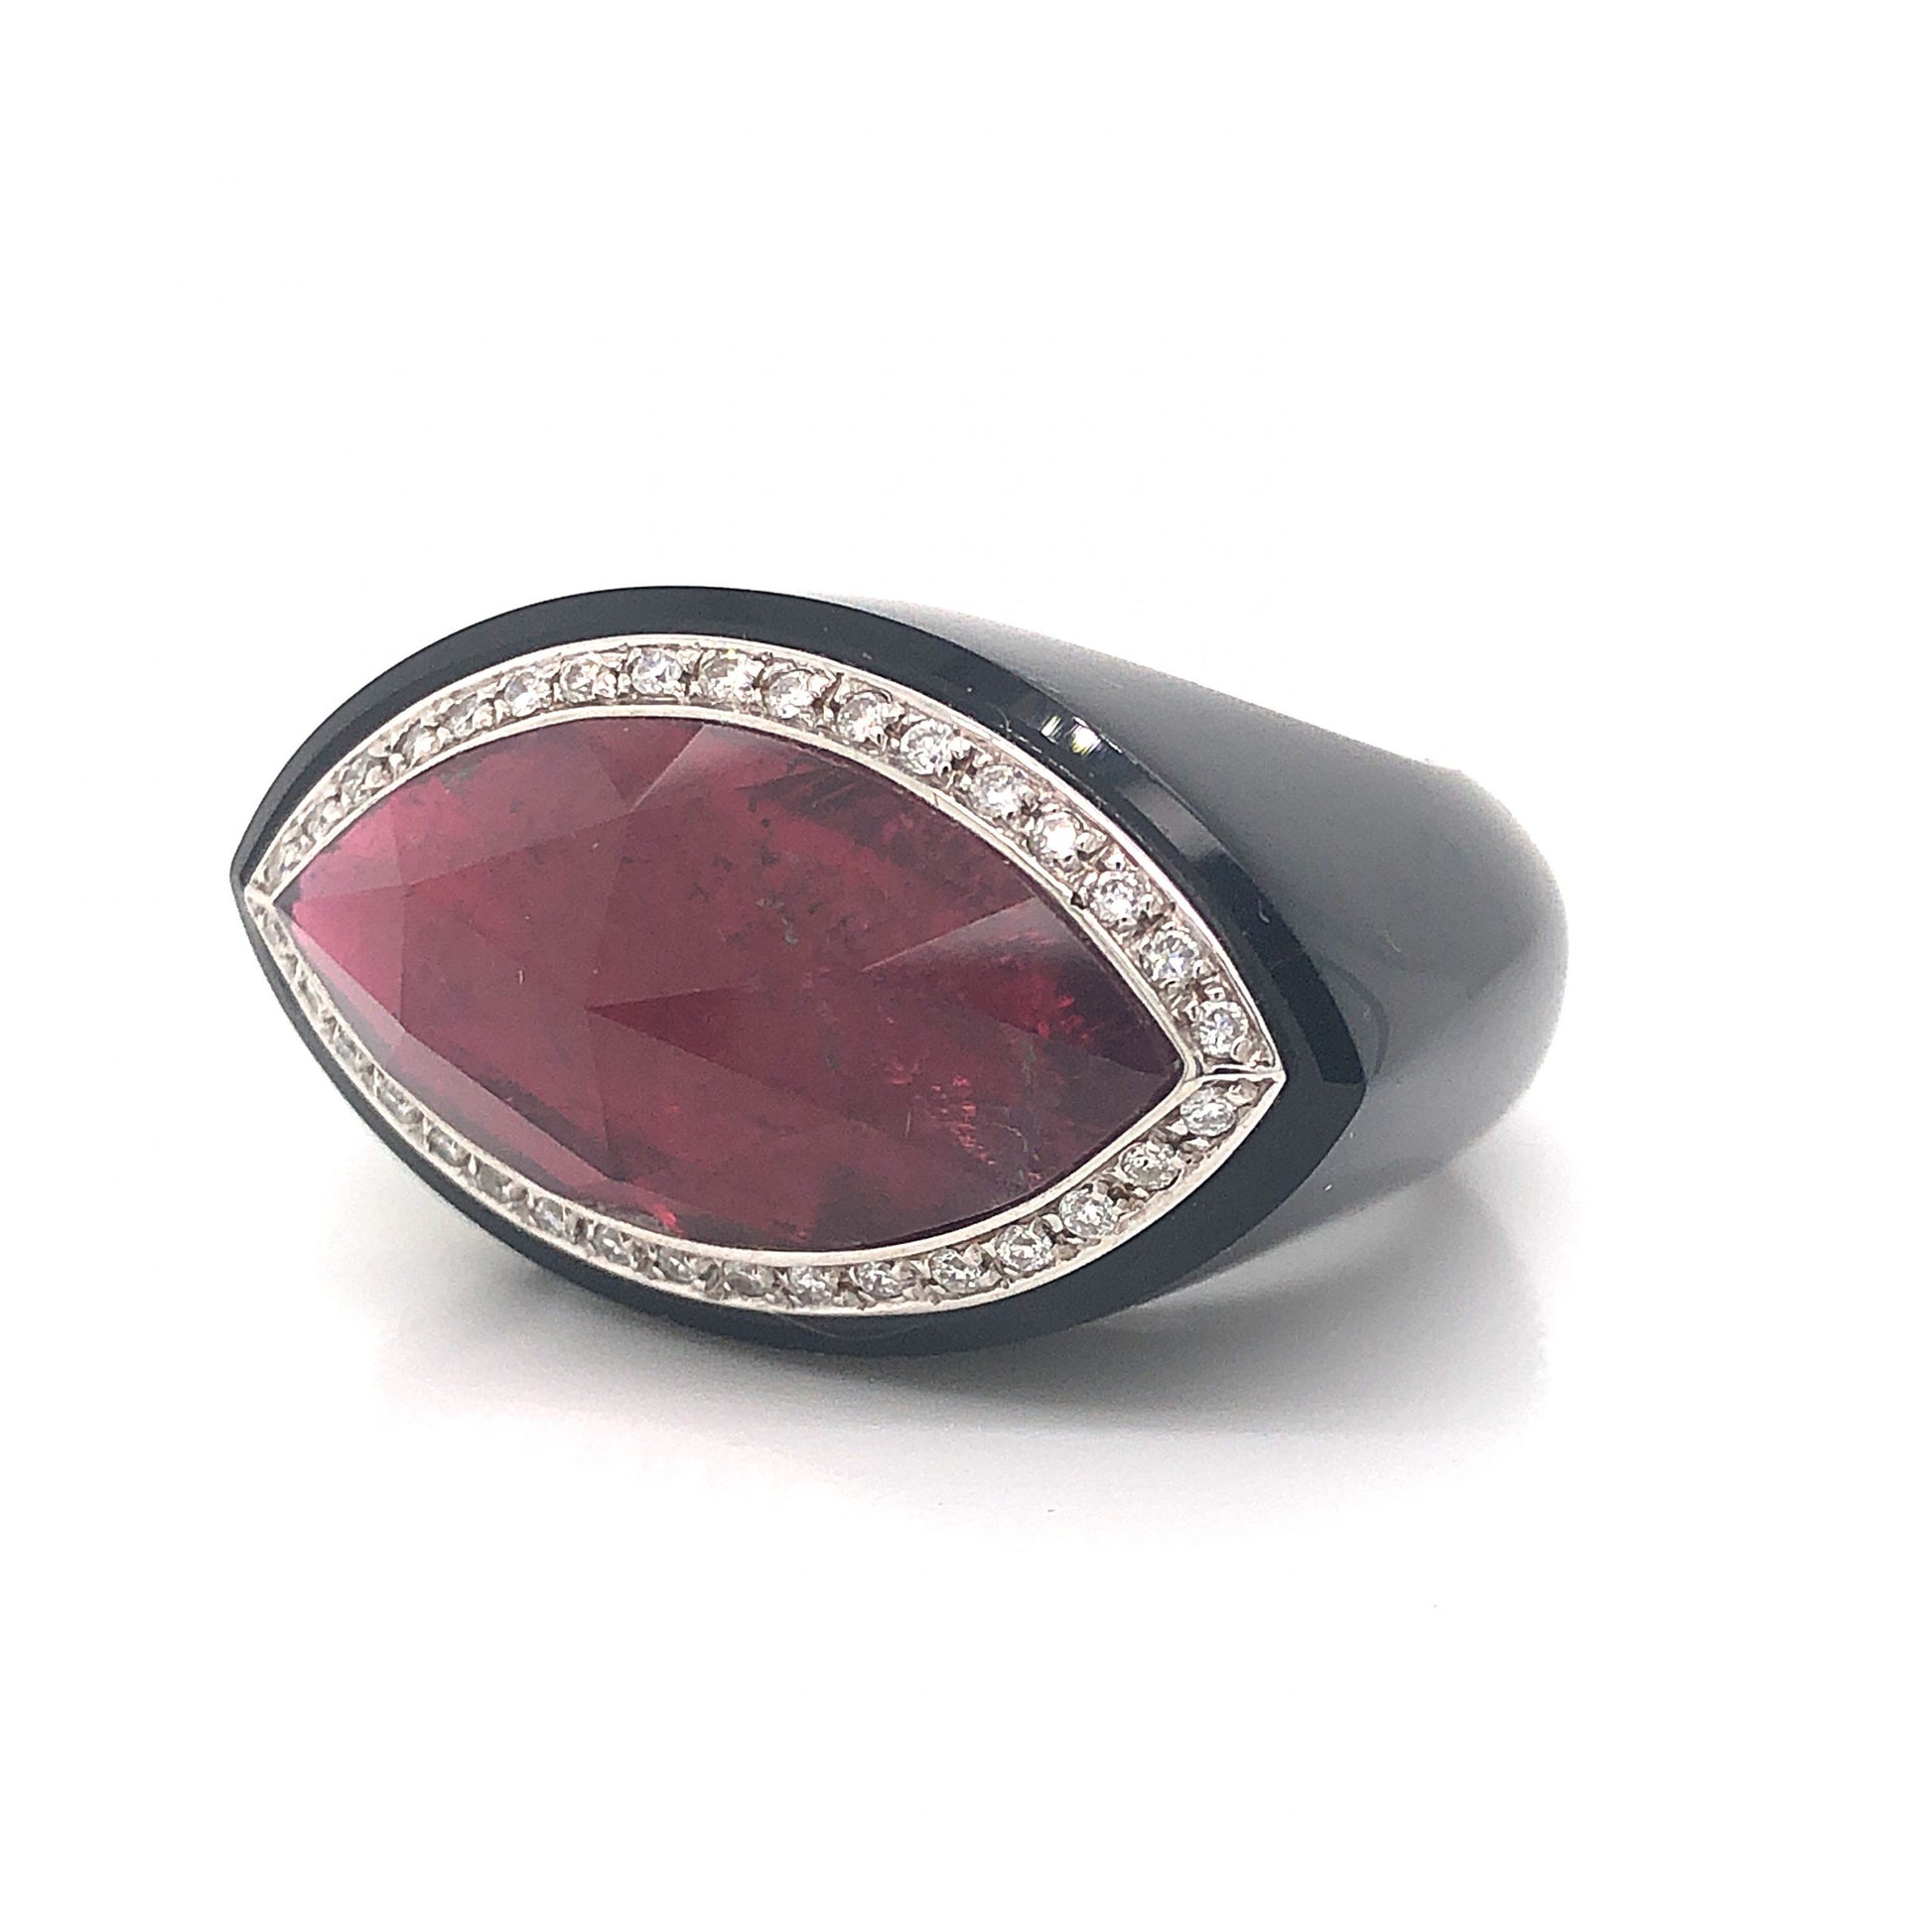 Pietra Di Luna Pink Tourmaline & Diamond Cocktail Ring in 18k White GoldComposition: Platinum Ring Size: 6.5 Total Diamond Weight: .54ct Total Gram Weight: 18.1 g Inscription: 161 FO, 750 ITALY , PIETRA DE LUNA 
      